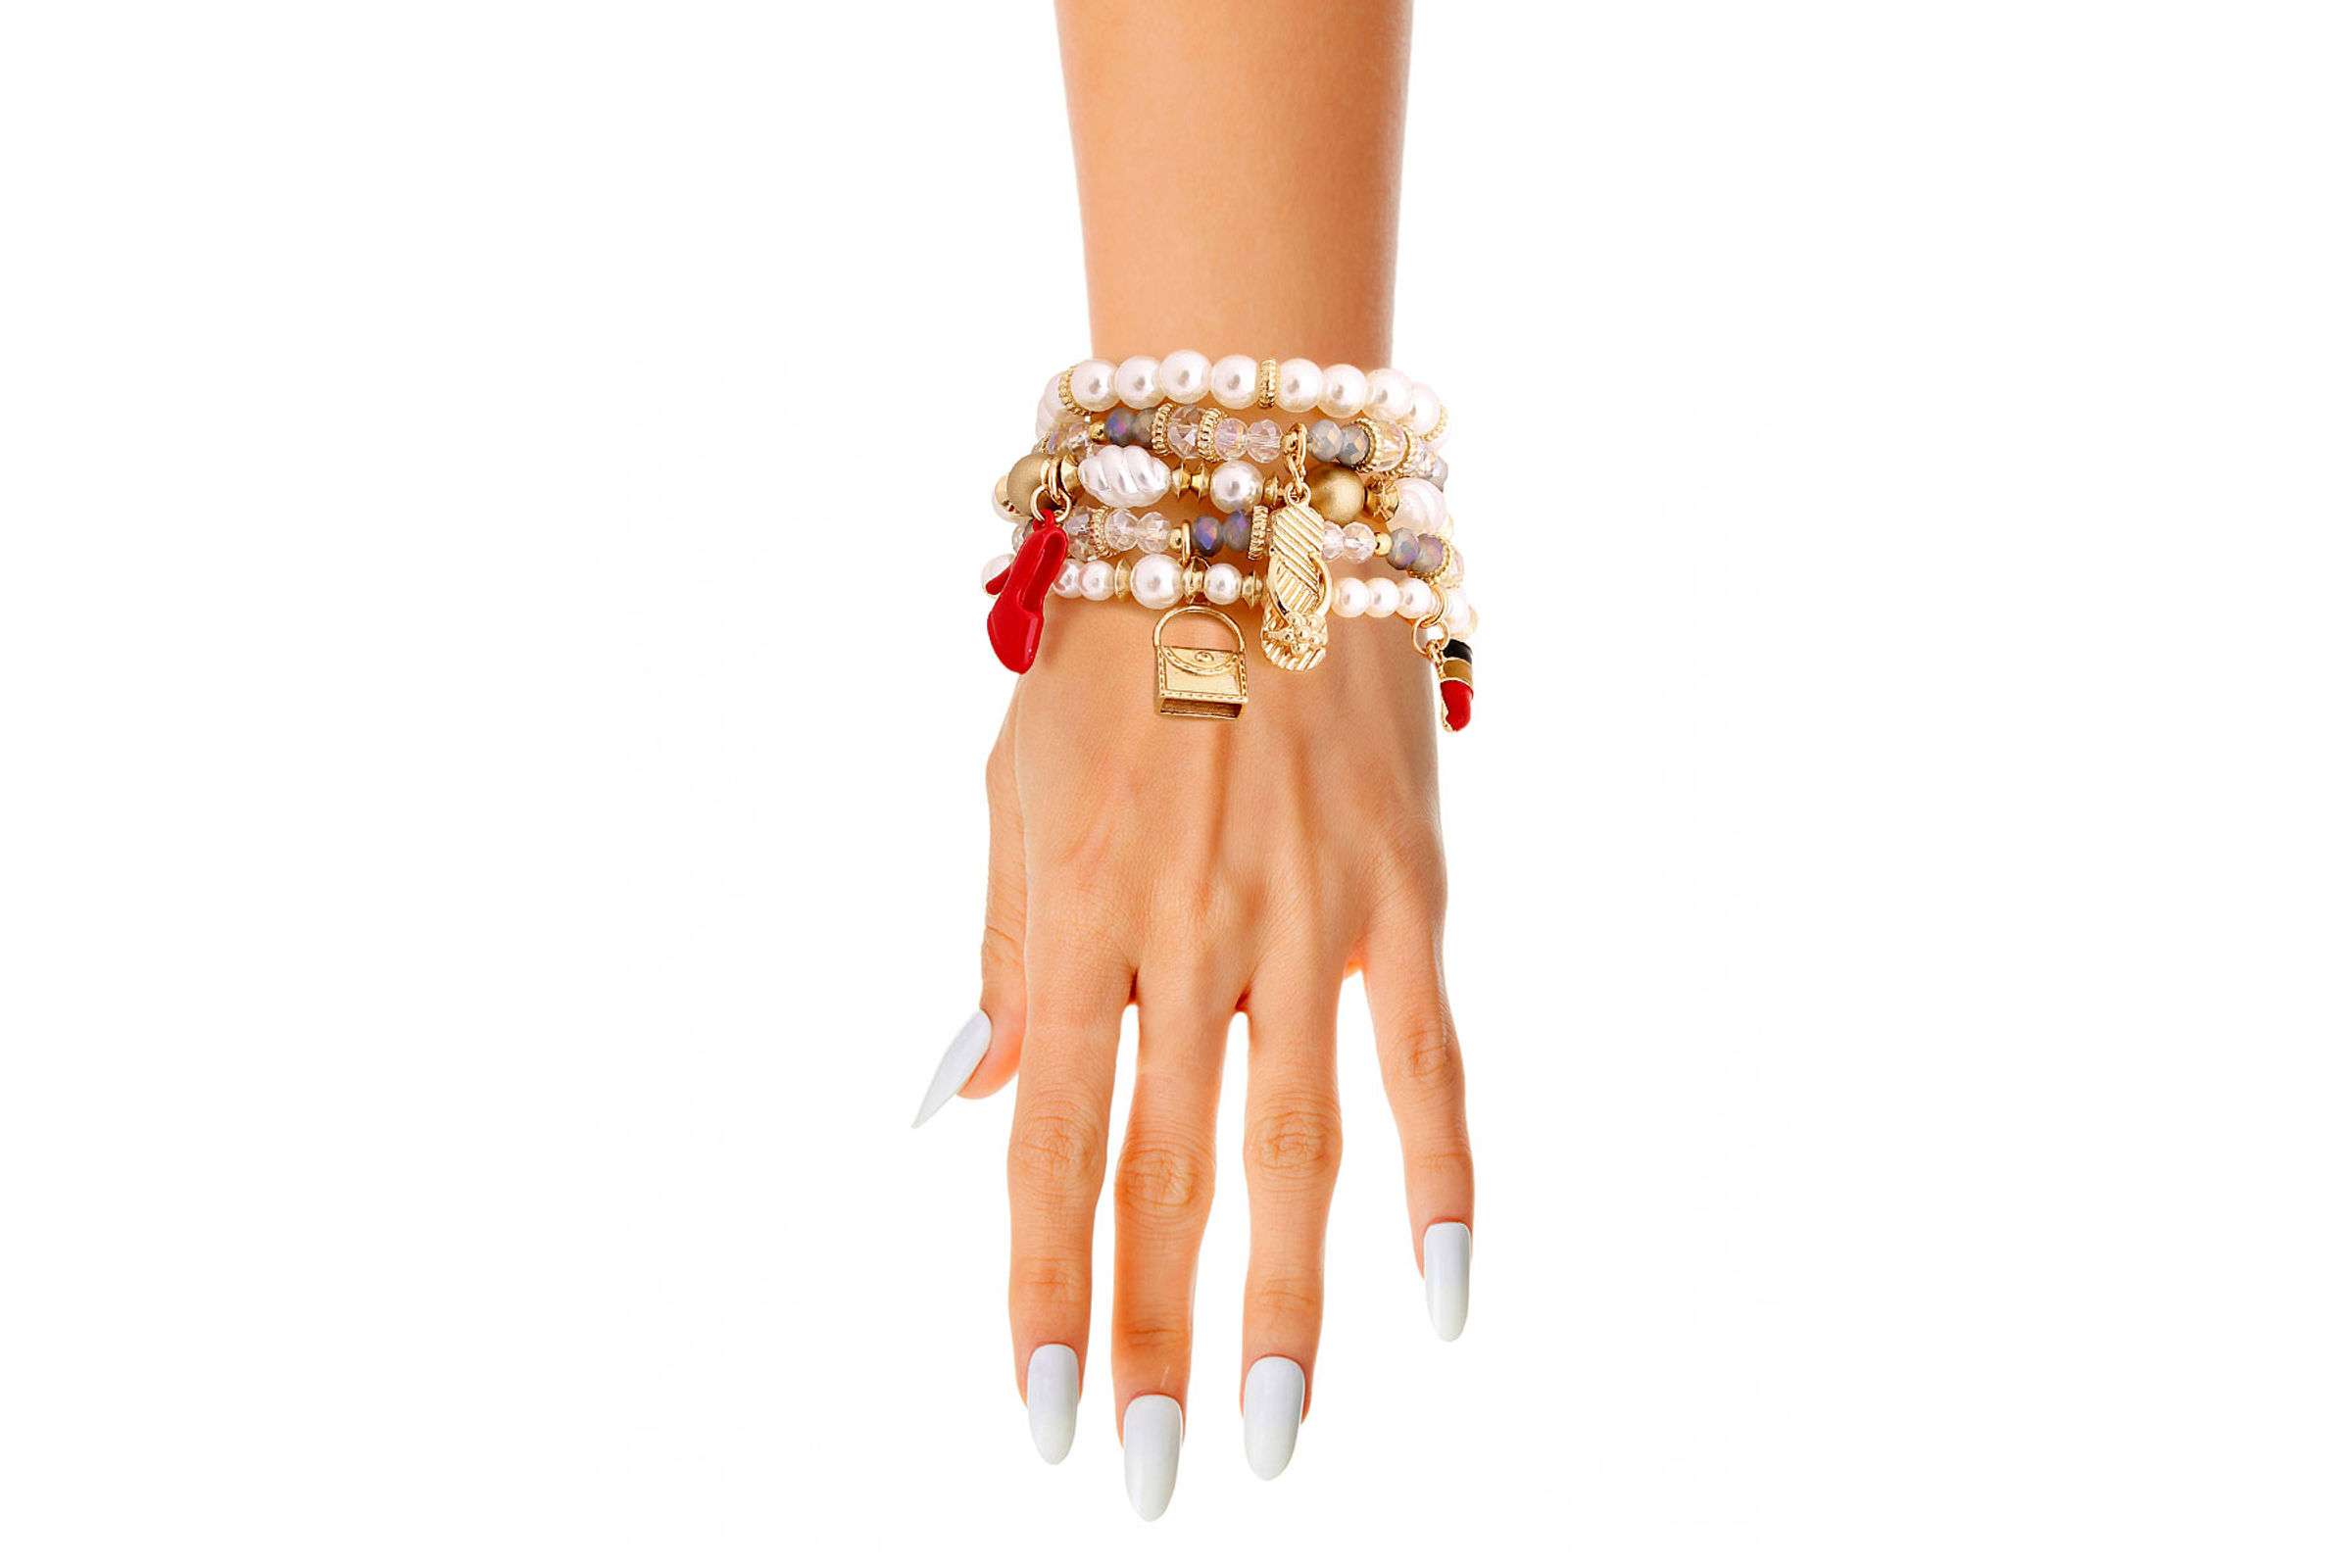 2023 French Style Effortless Thin Charm Bracelet Fashionable Gold Bangle  With Niche Design From Aolin6851, $16.53 | DHgate.Com